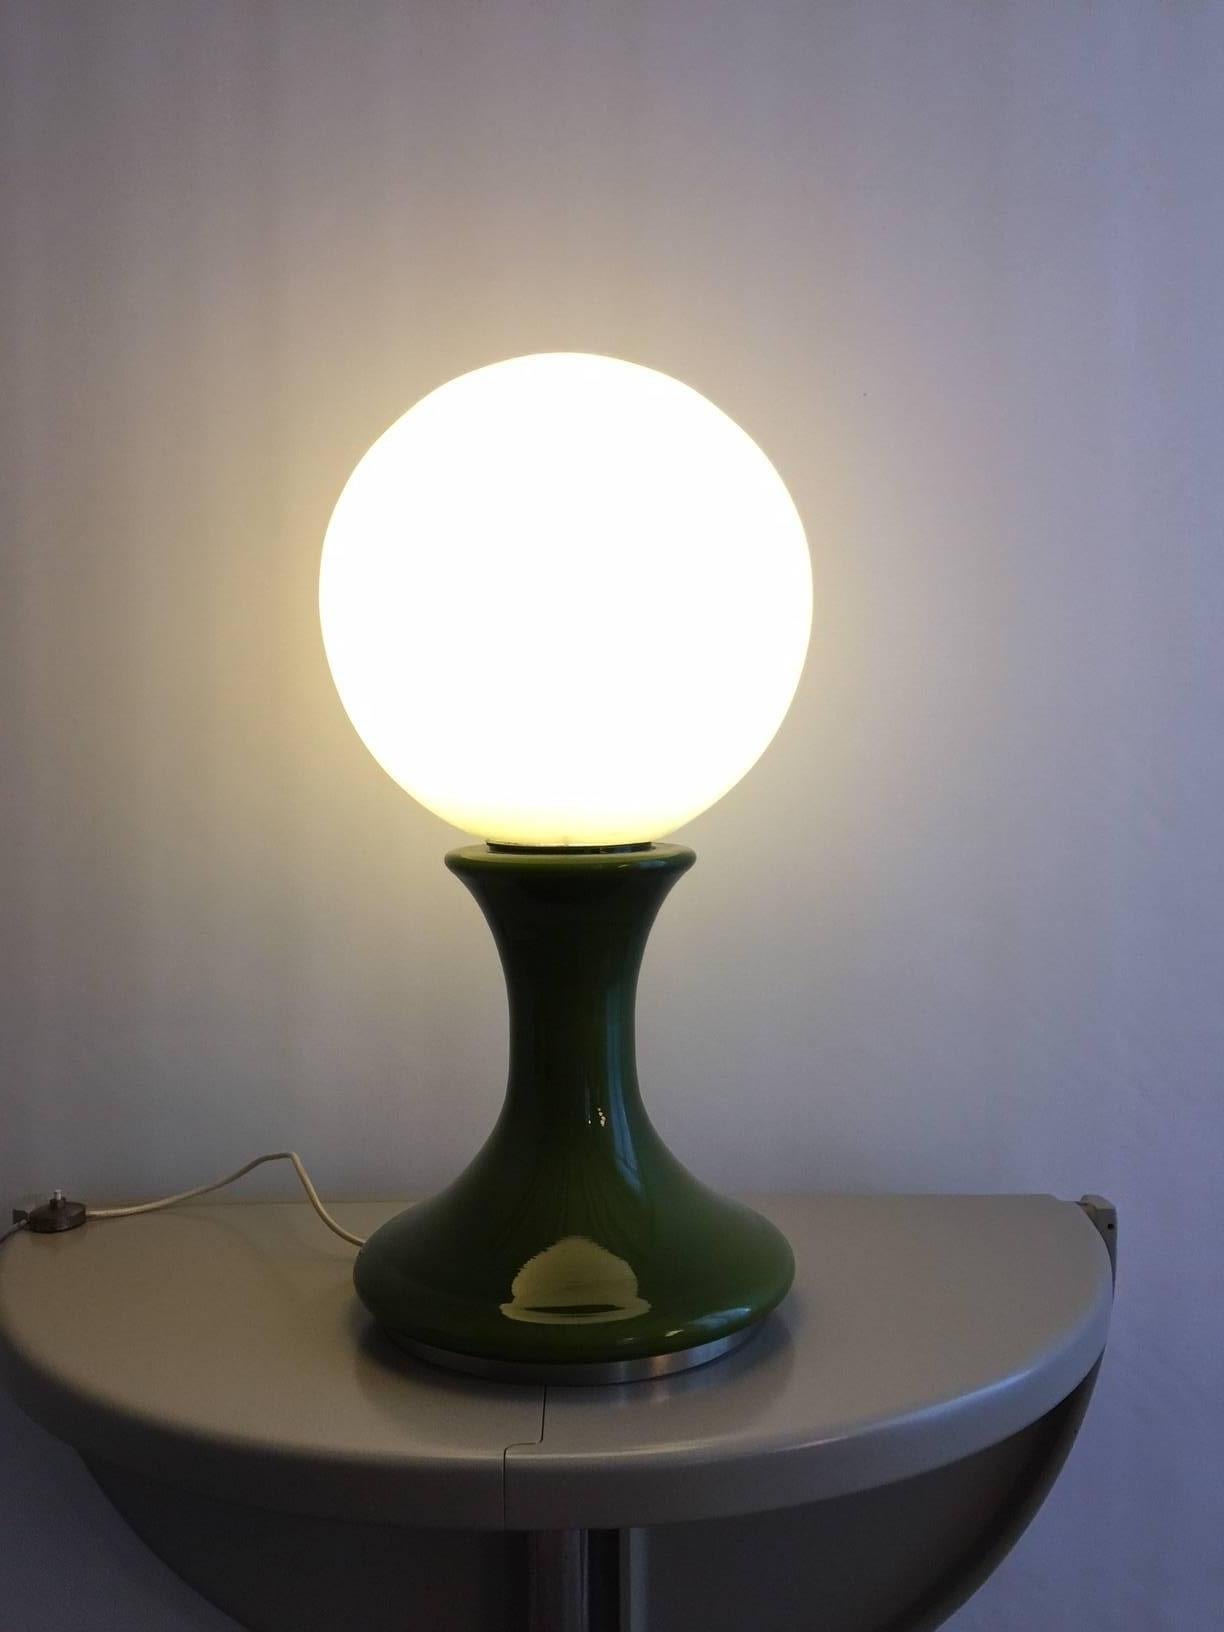 Big Murano table lamp made by two blown glass elements, the green base and the white bulb have two separate lights or can be switched together. The green glass element stands on a round chrome steel base.